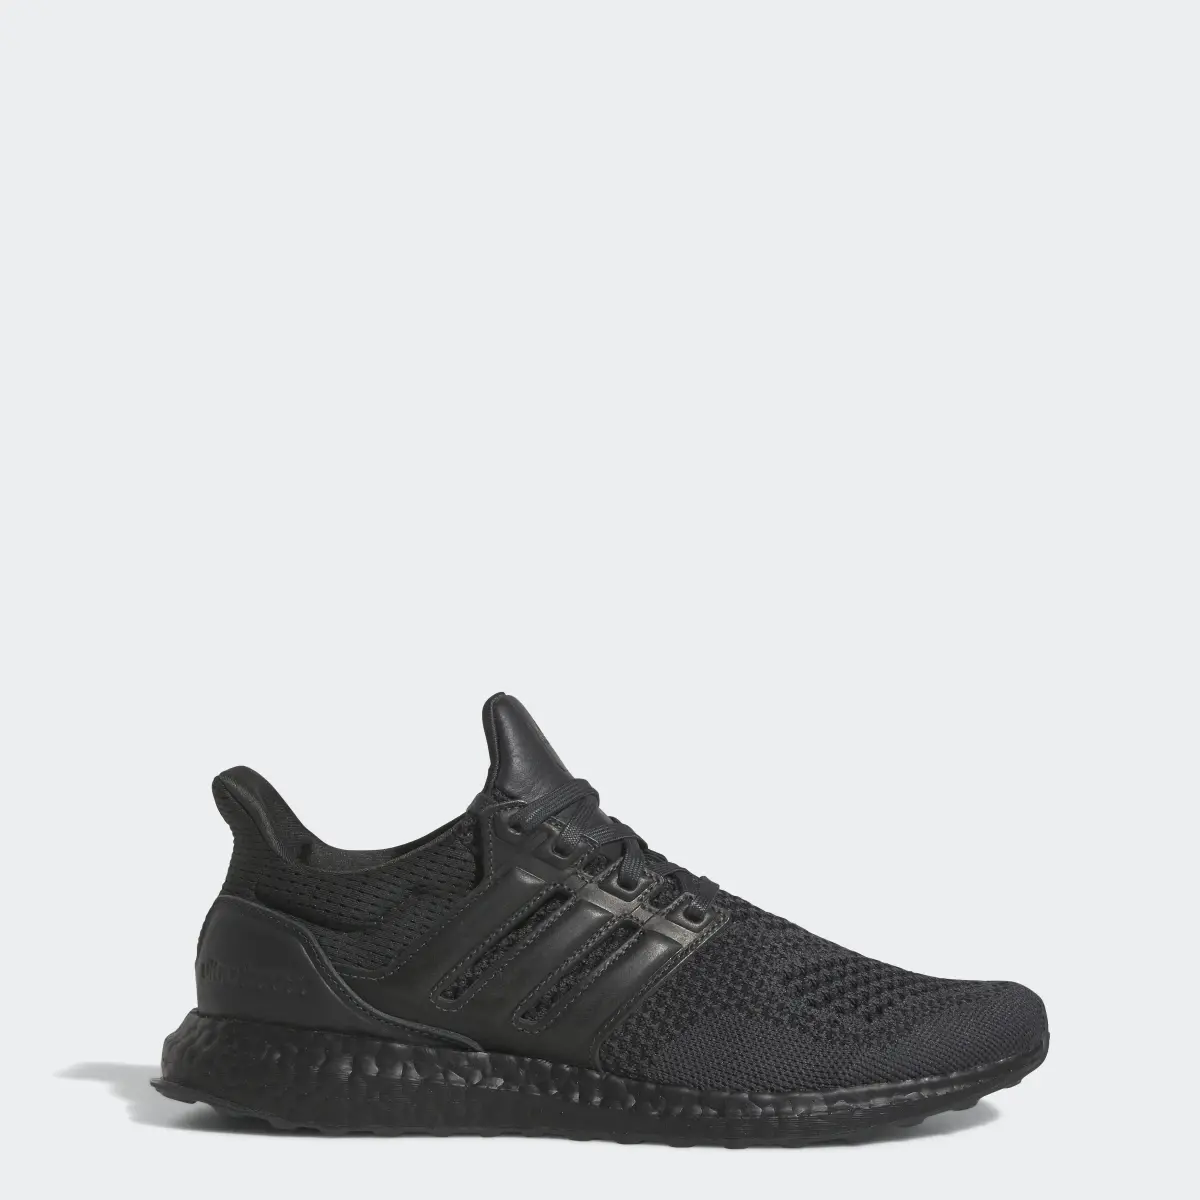 Adidas Ultraboost 1 DNA Shoes. 1